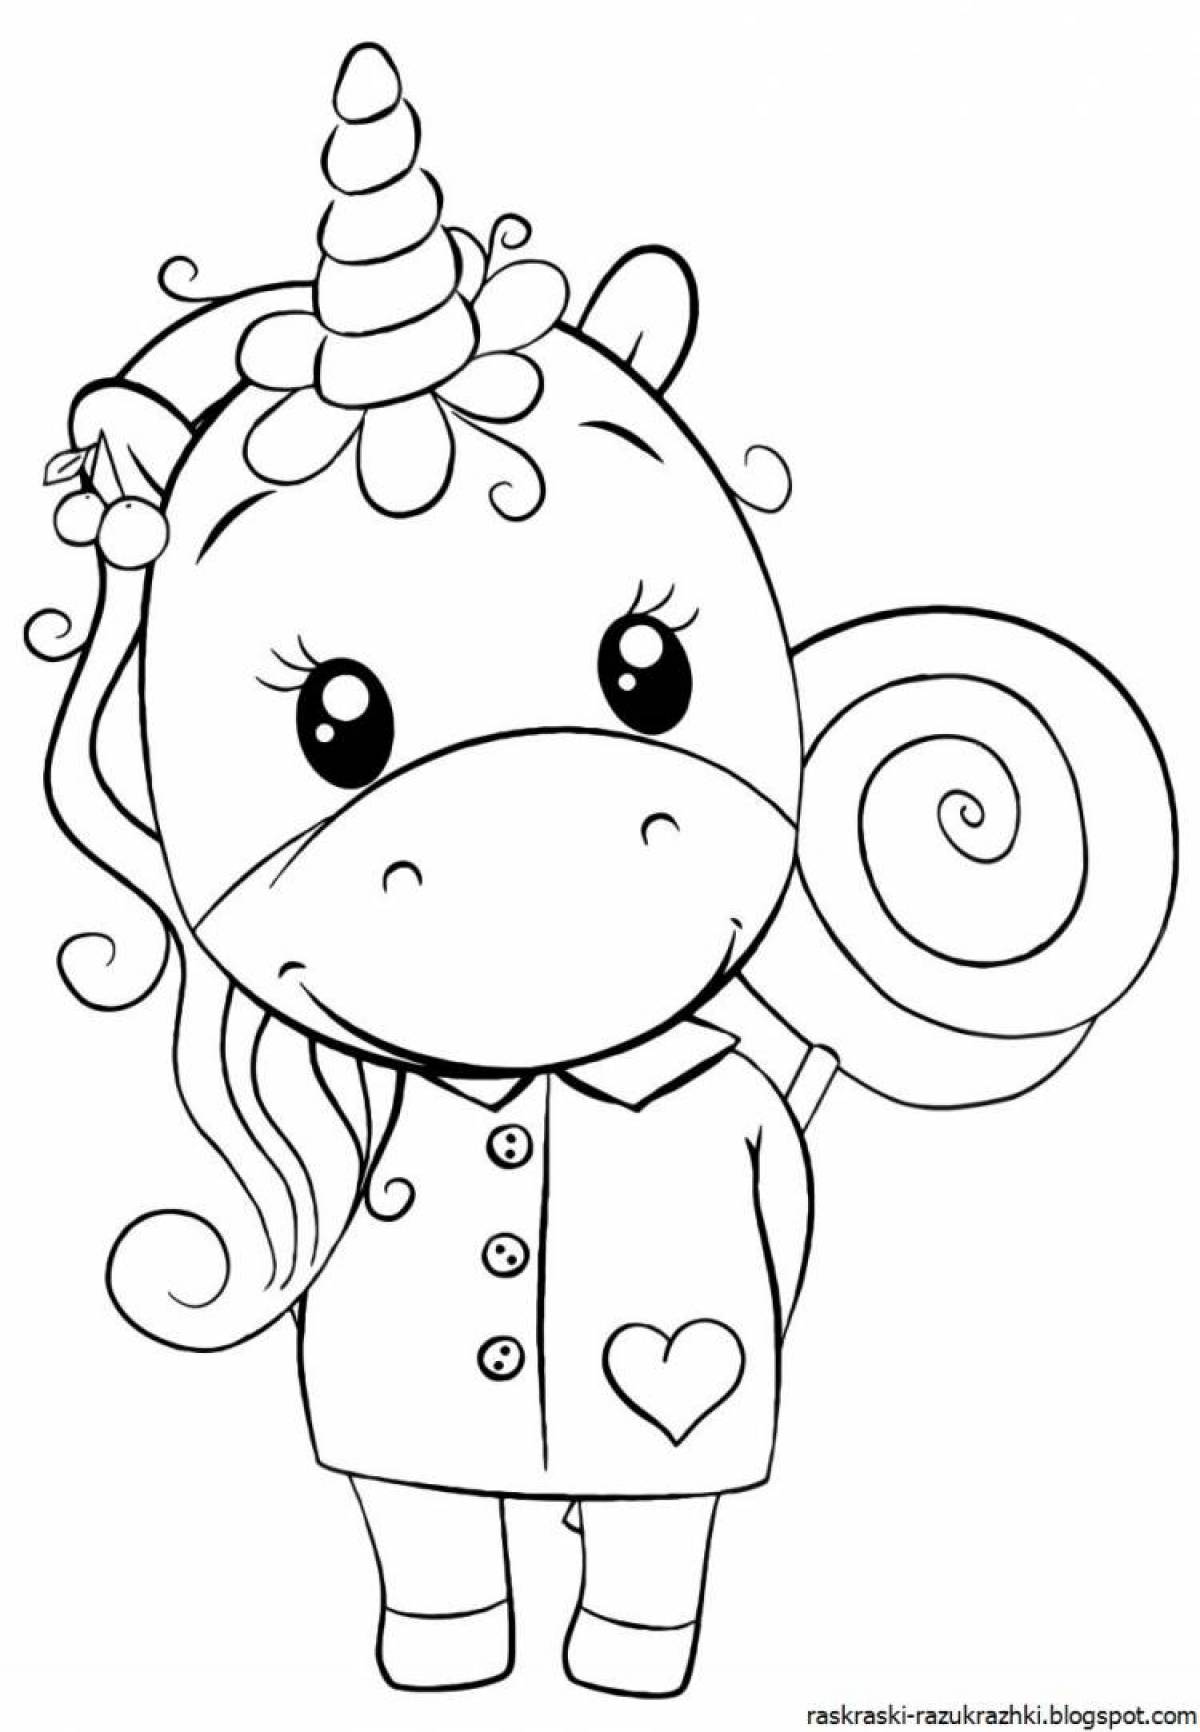 Gorgeous unicorn puppy coloring book